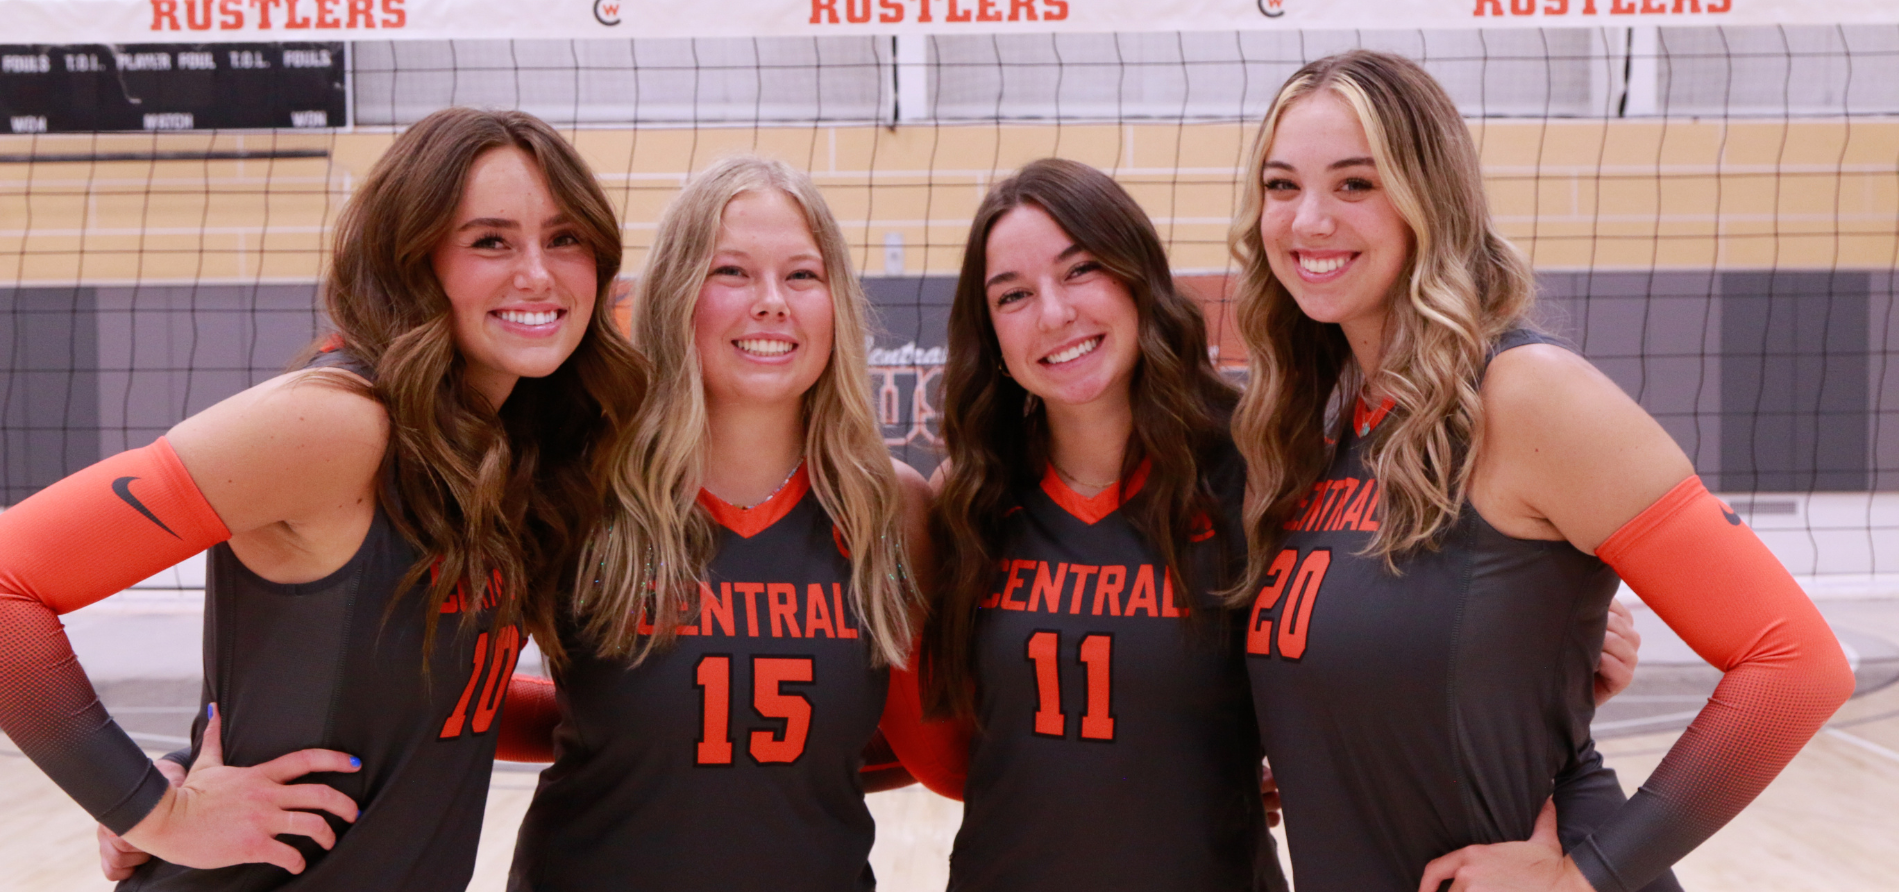 Rustlers Gearing Up for Conference Play